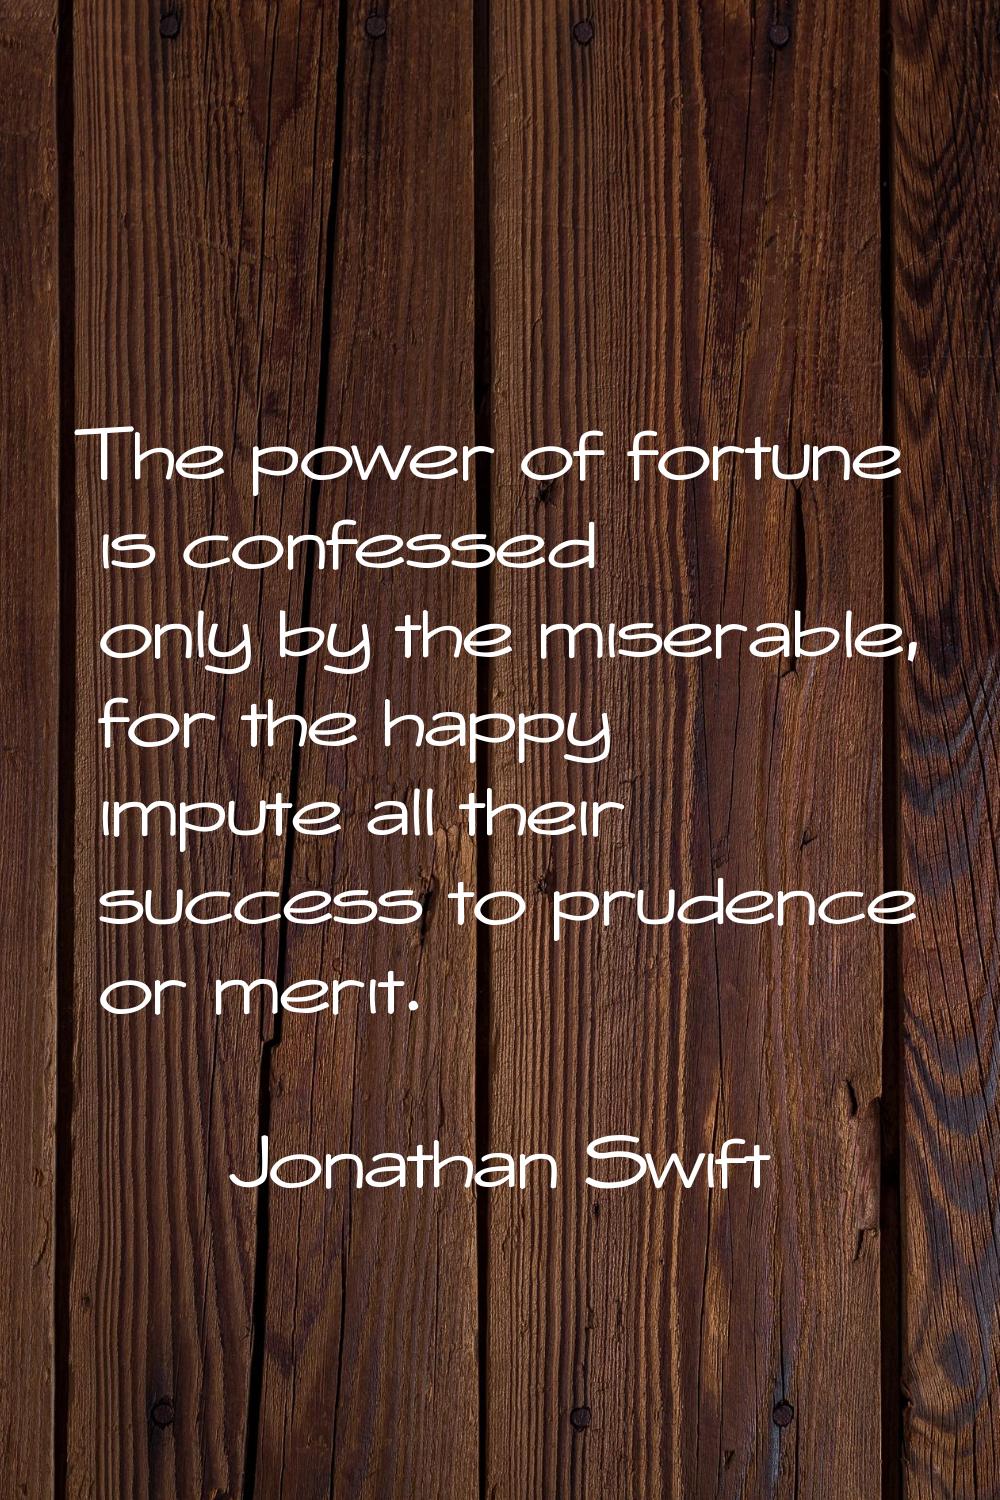 The power of fortune is confessed only by the miserable, for the happy impute all their success to 